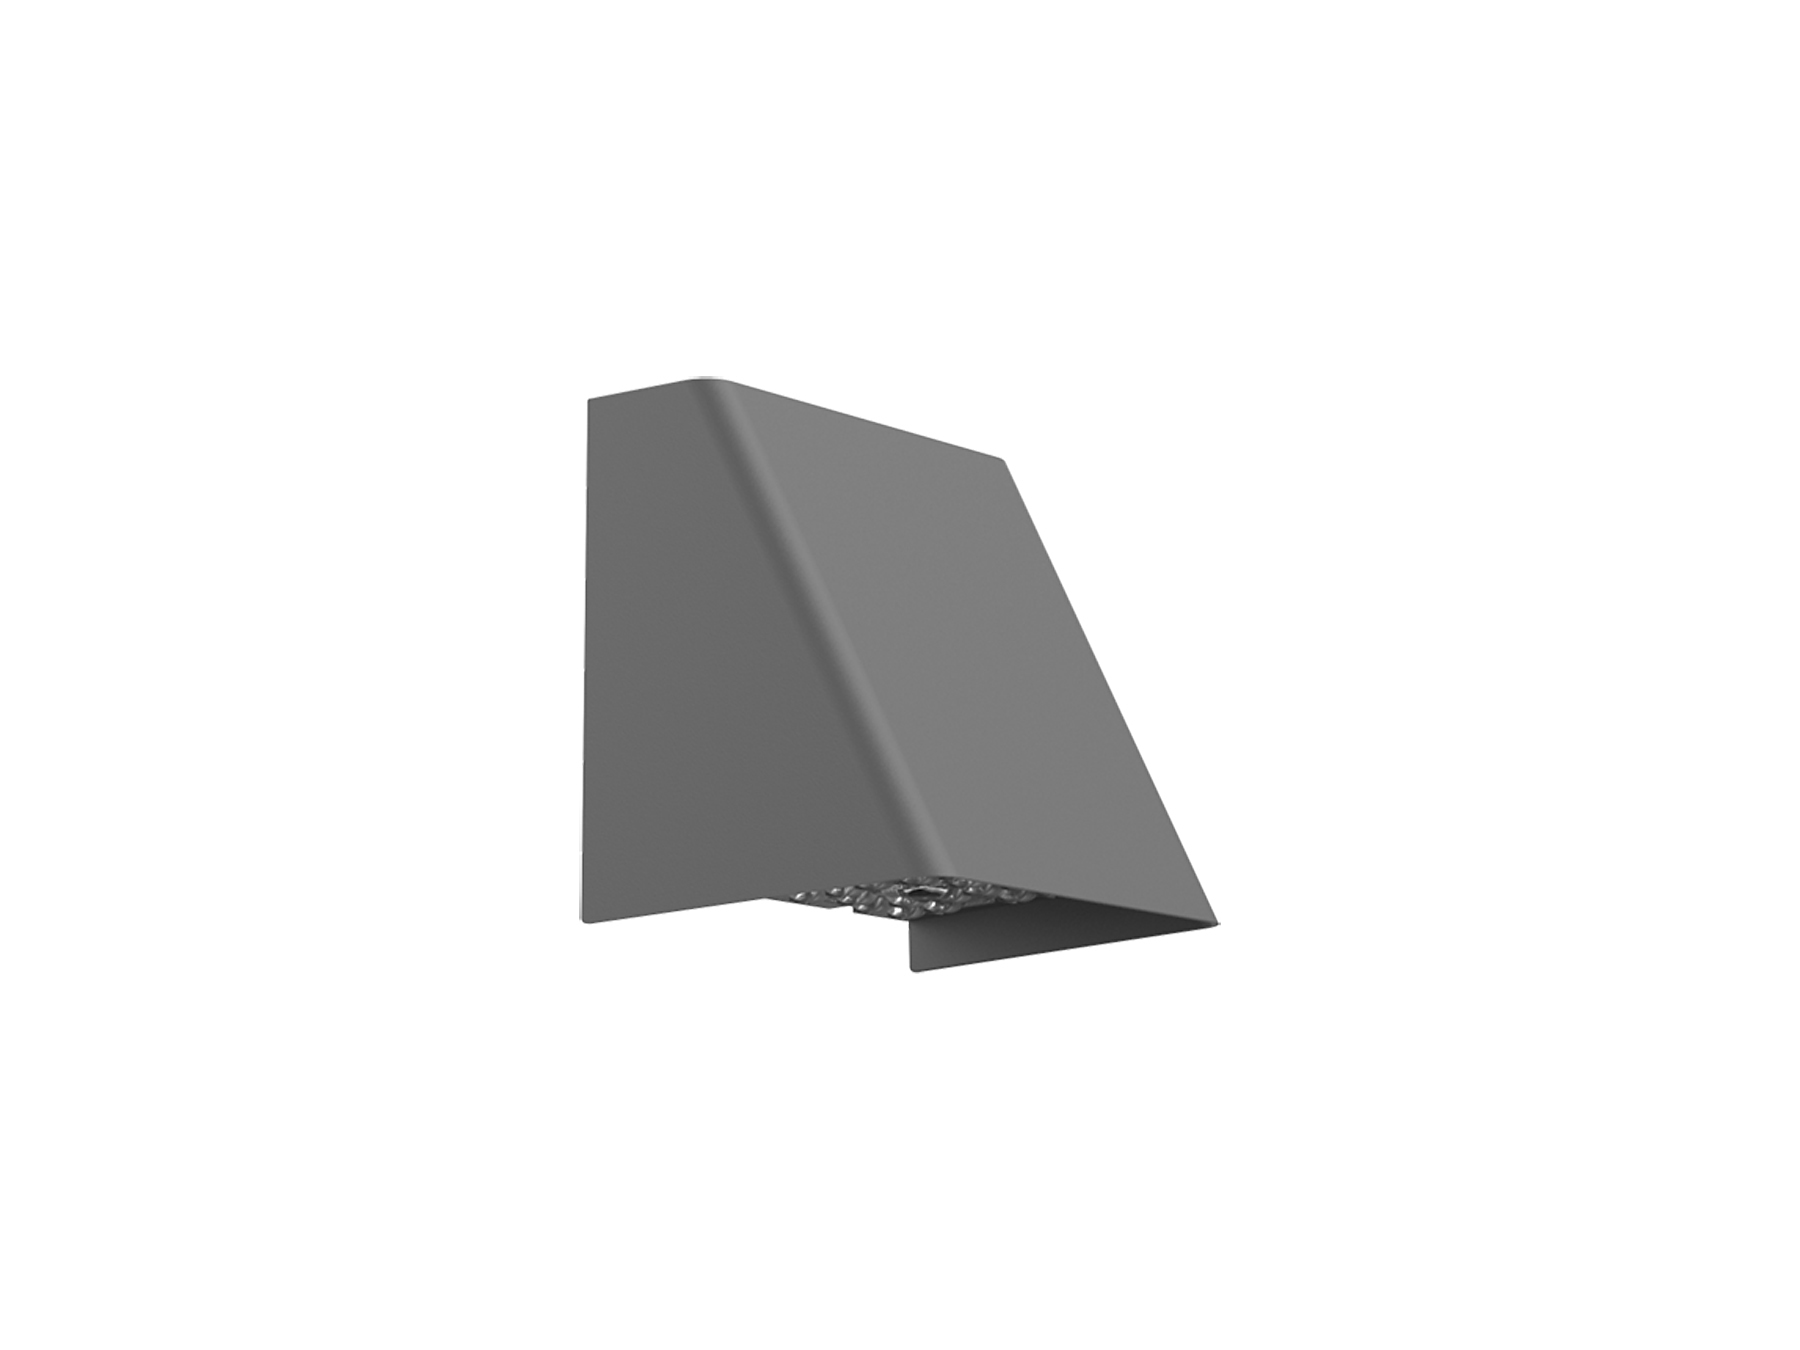 GeoForm wedge small LED wall sconce GWS